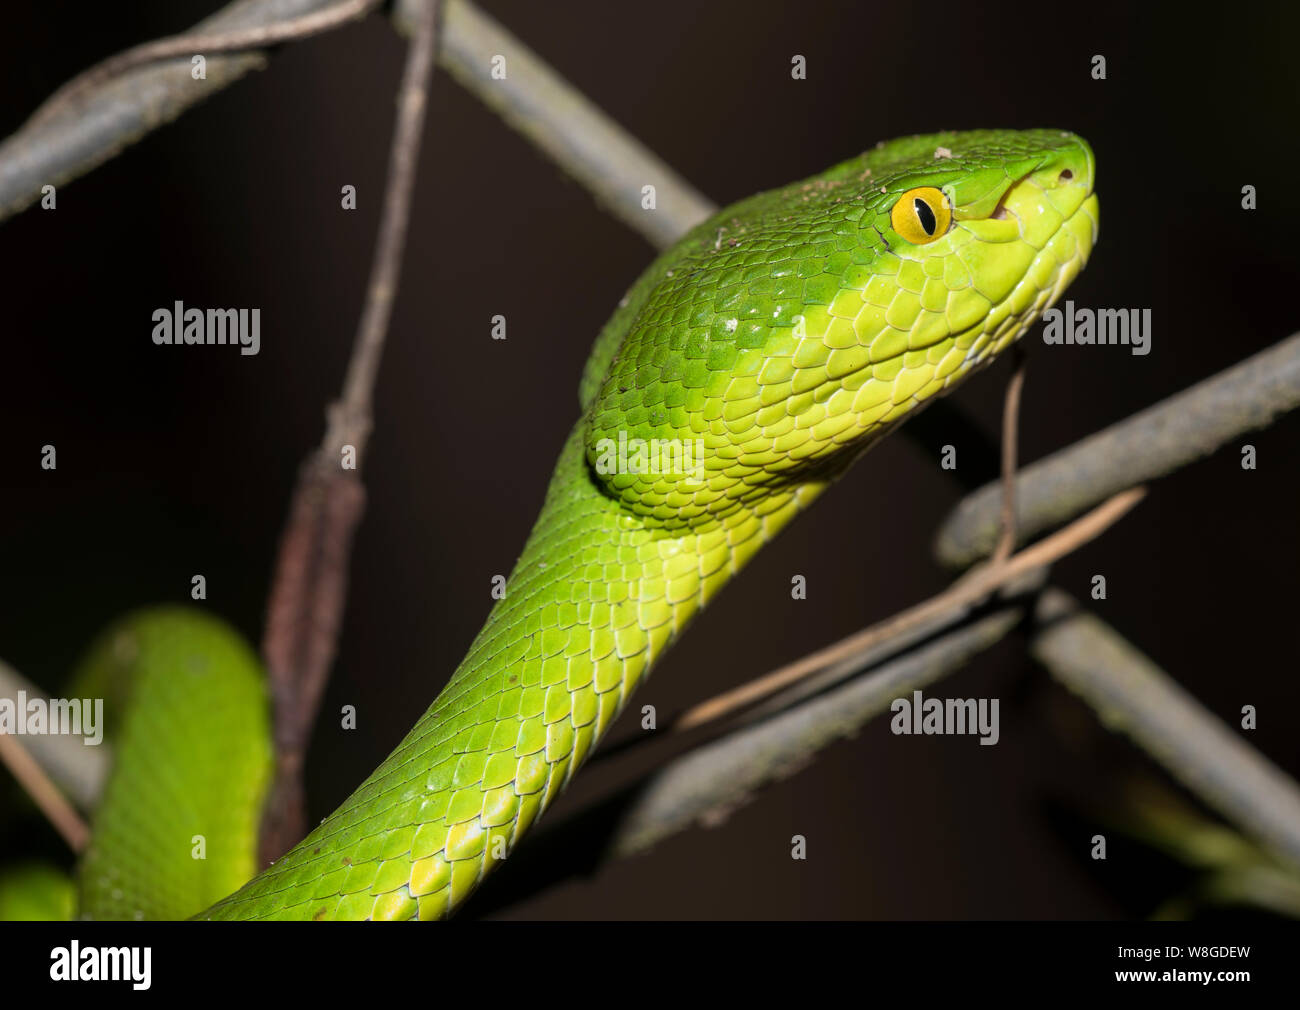 Close up photo of a White-Lipped Pit Viper  (Trimeresurus albolabris) curled up in Thailand Stock Photo